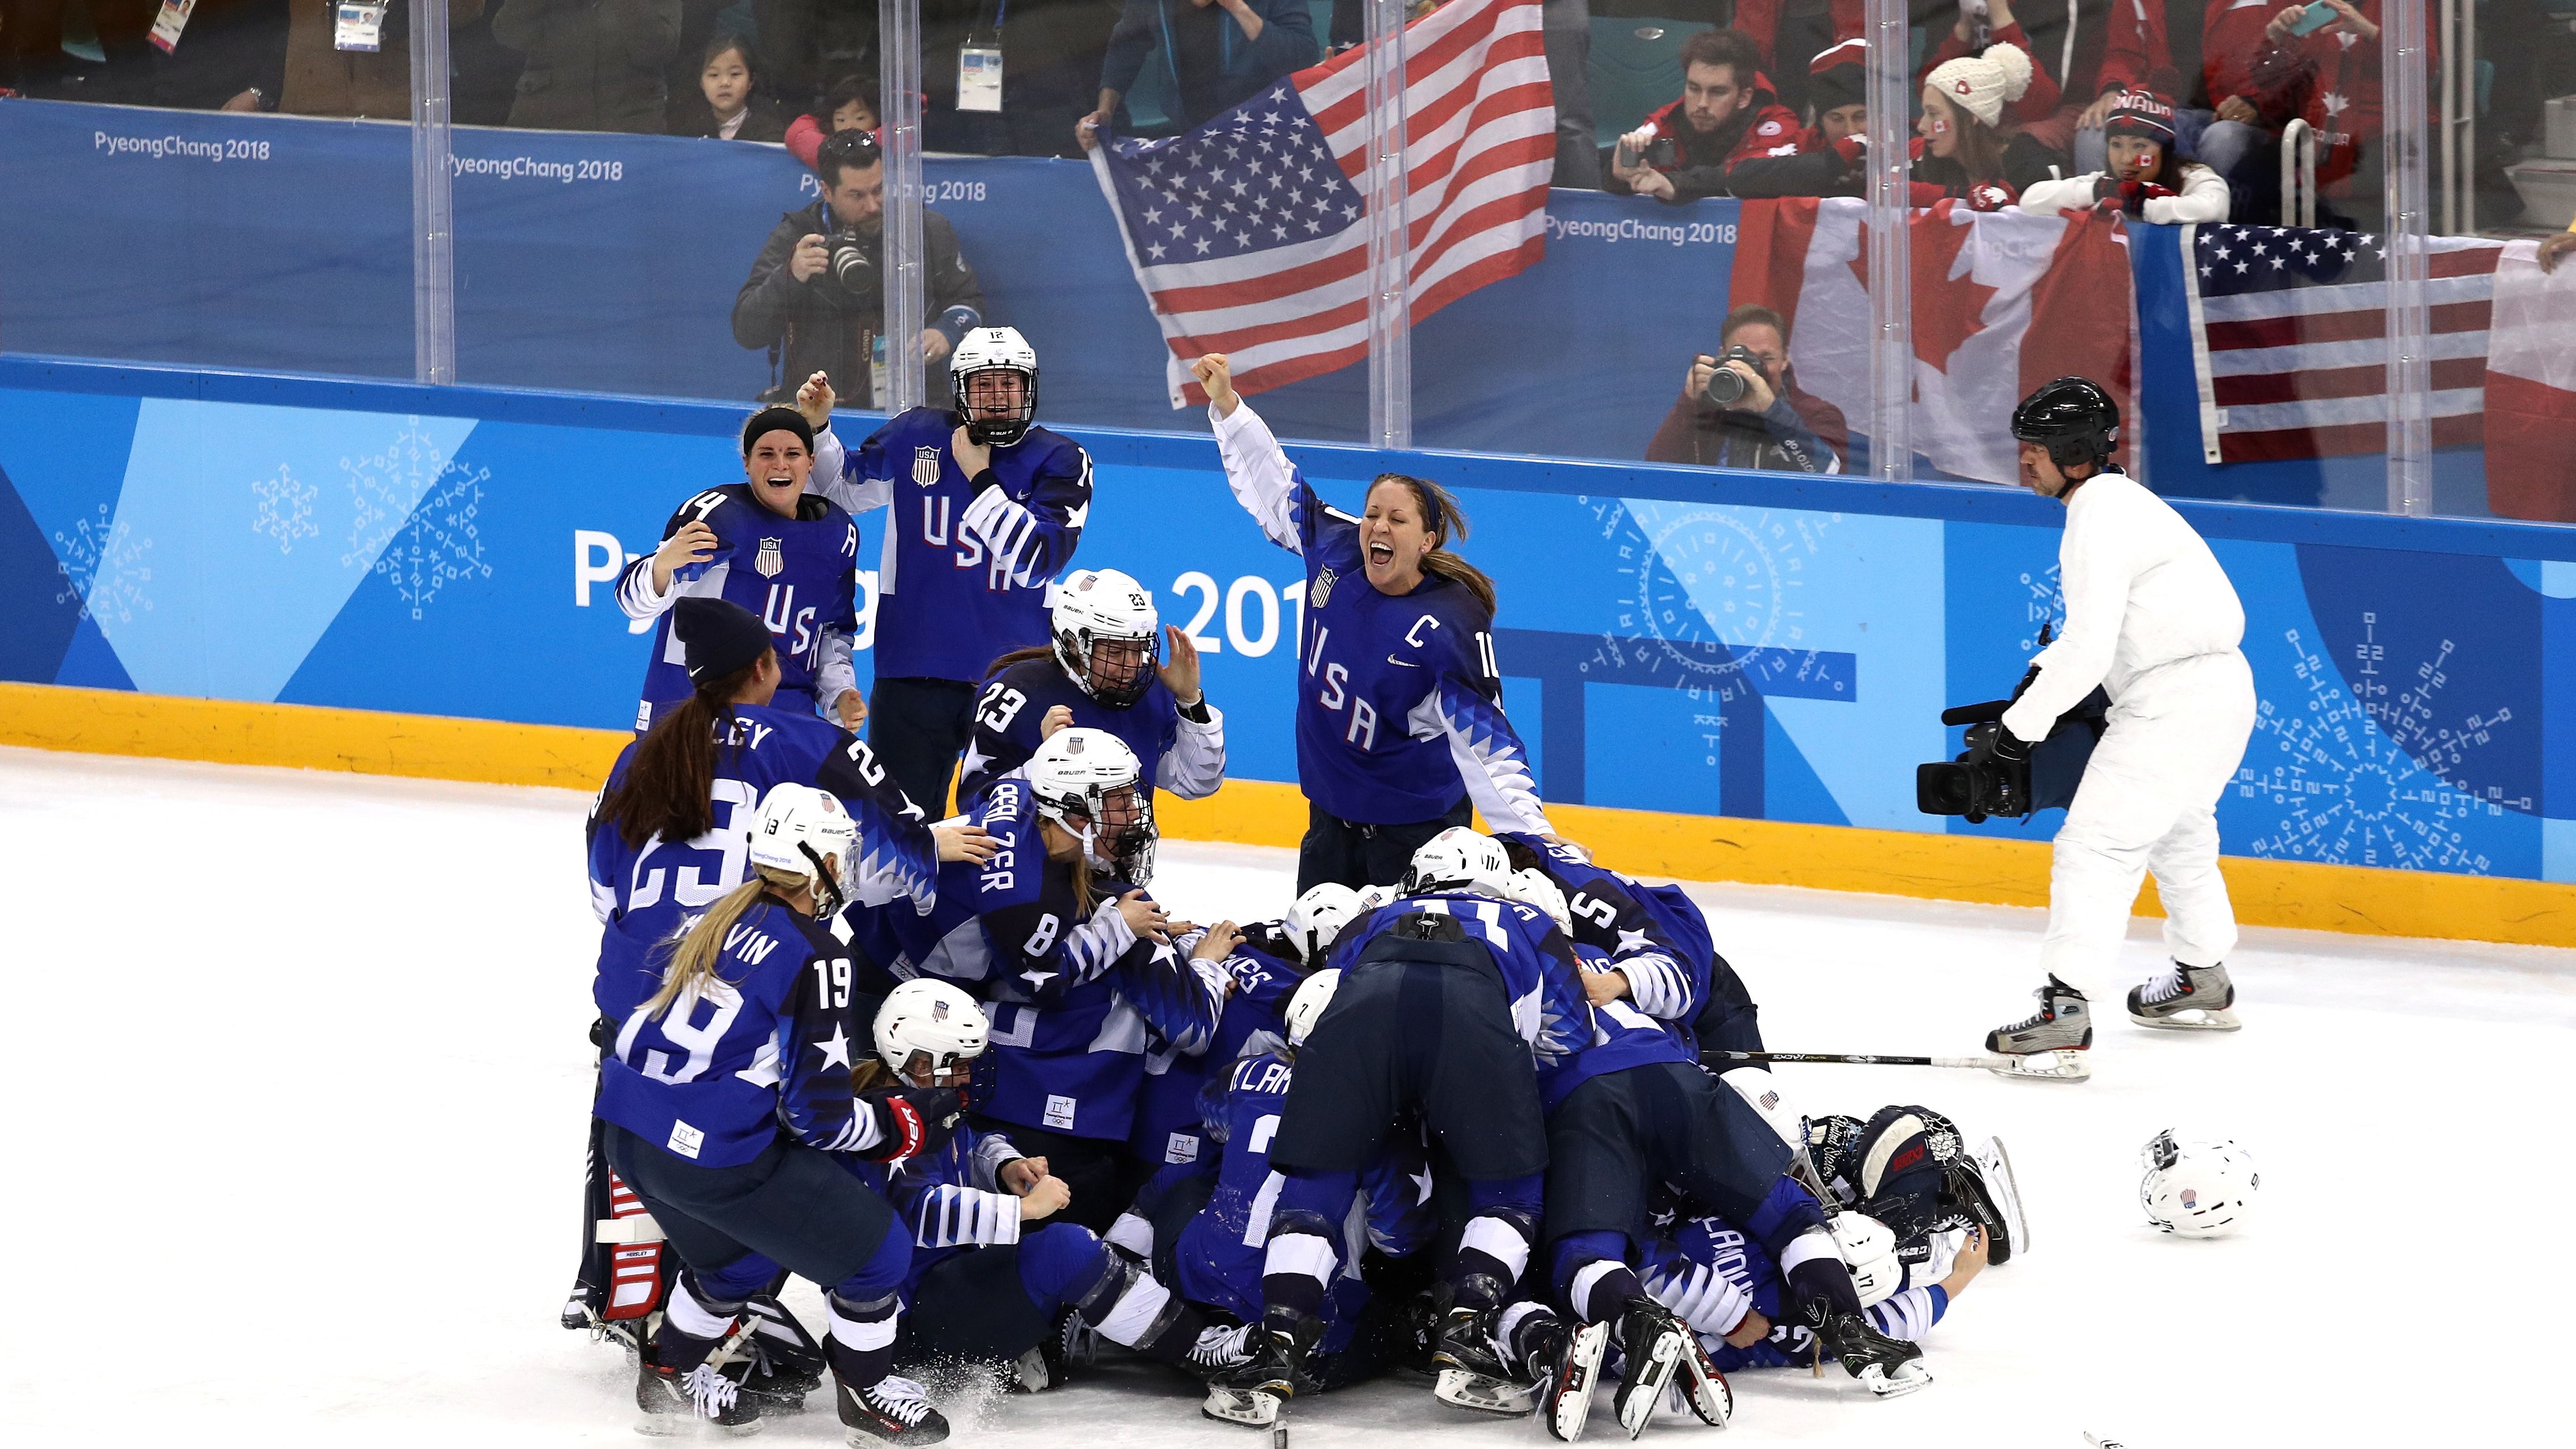 The US Women's Hockey Team celebrates after defeating Canada in a shootout to win the Women's Gold Medal Game on day thirteen of the PyeongChang 2018 Winter Olympic Games in South Korea.